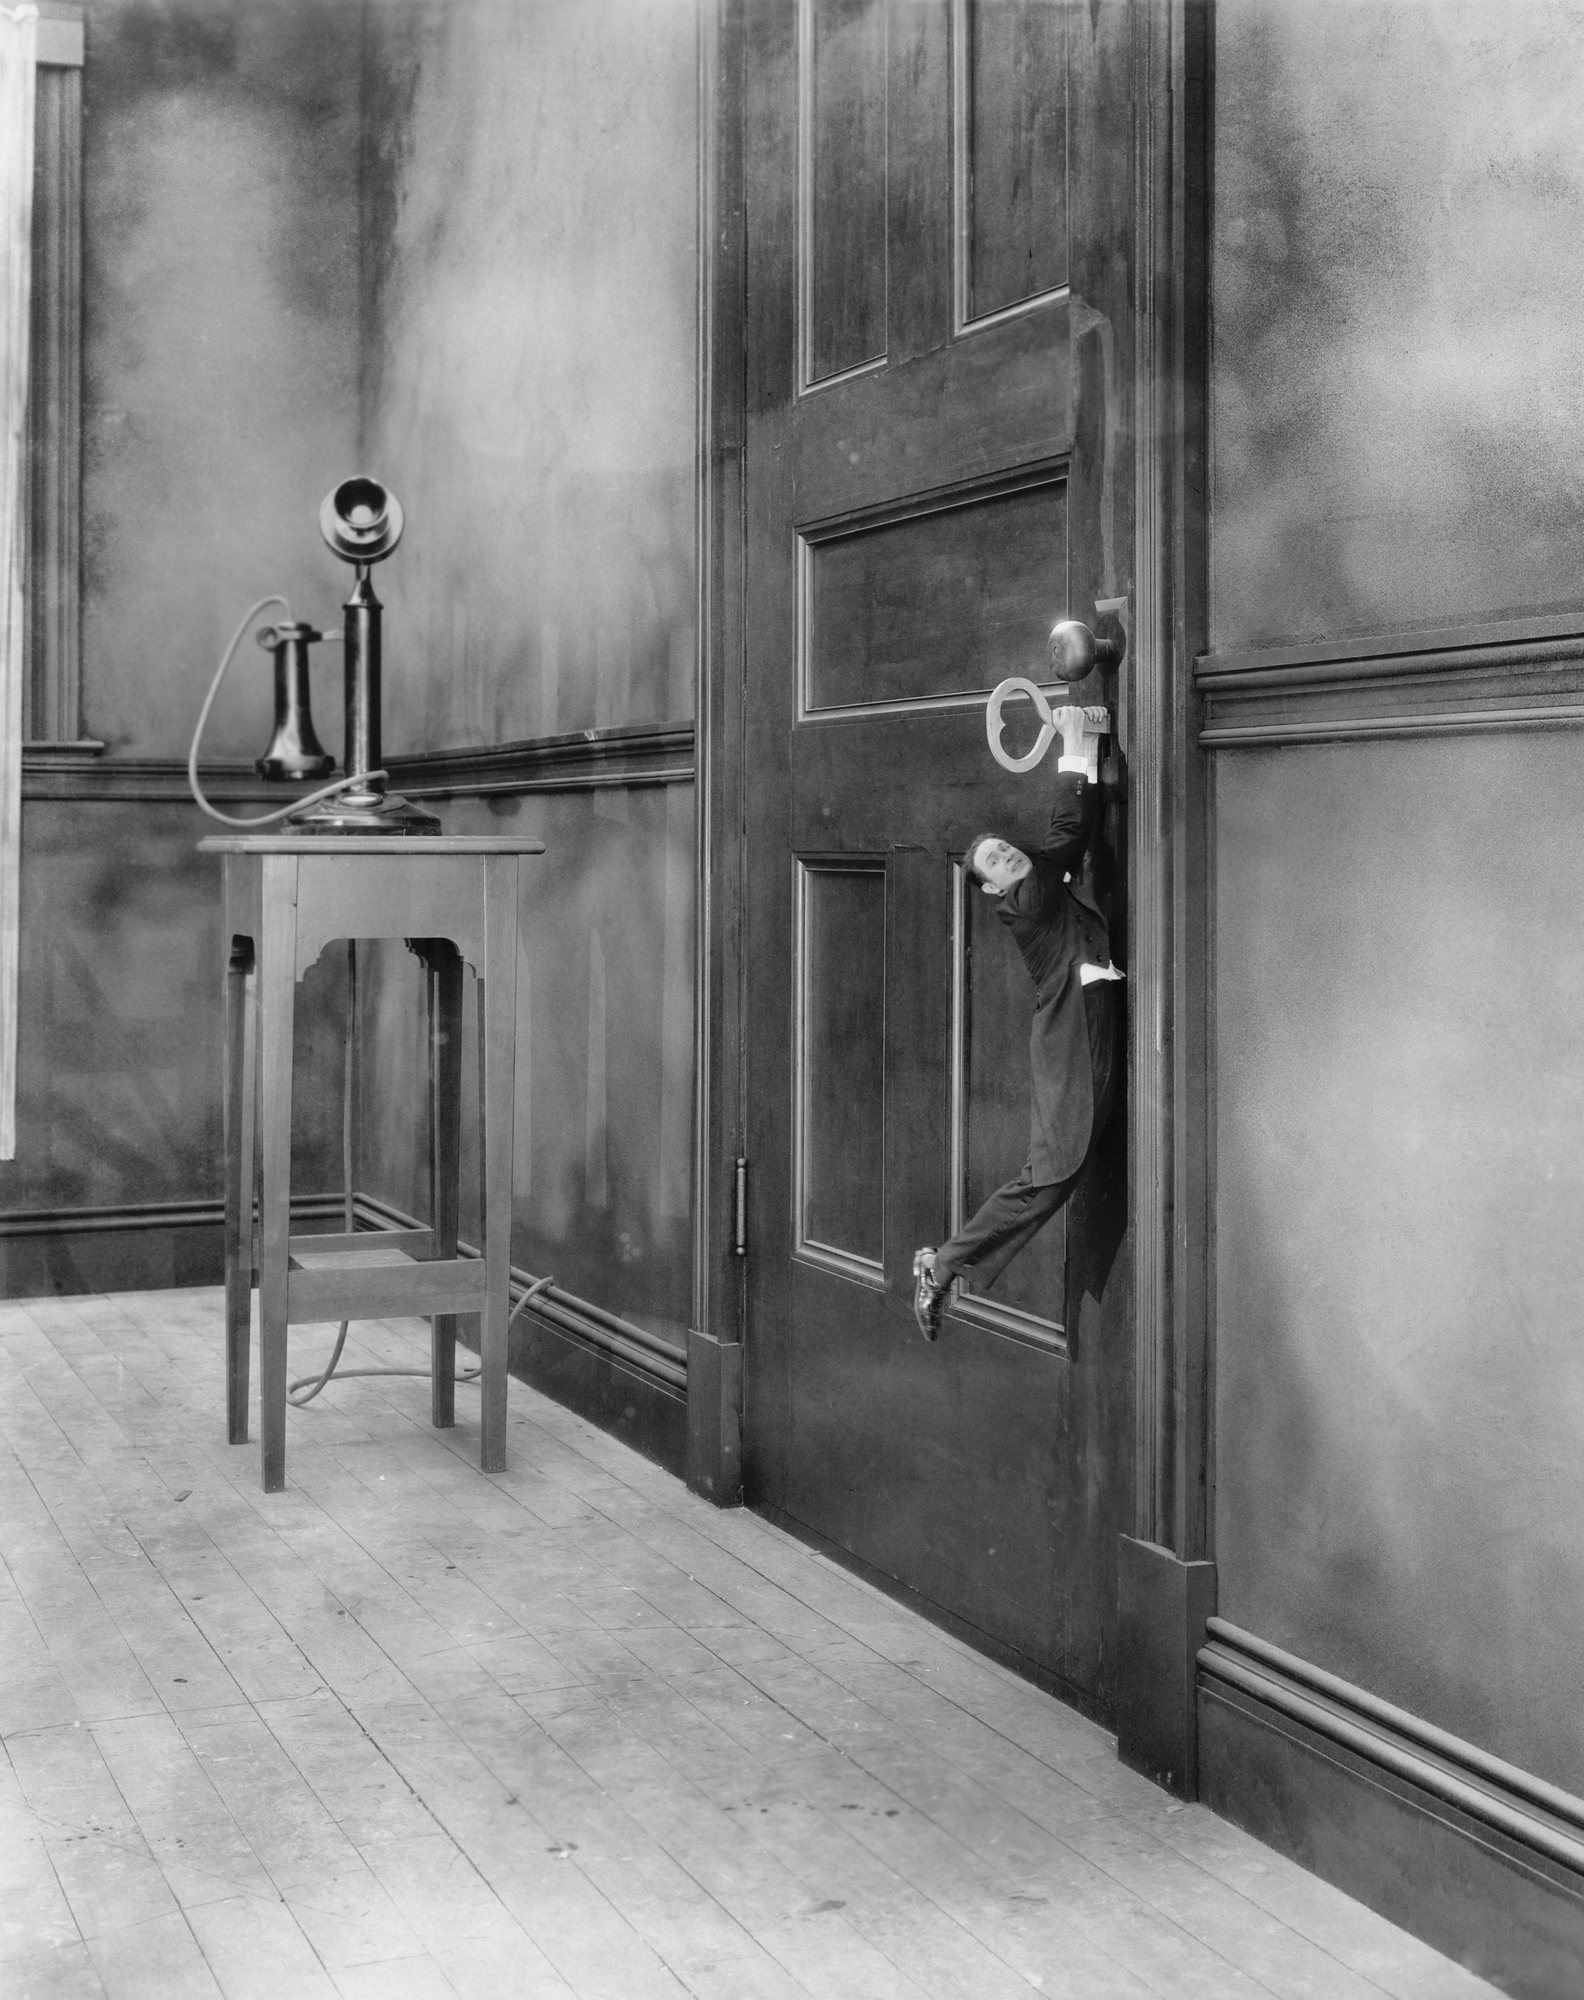 Black & White of tiny man hanging onto a key stuck in a locked door a la Alice in Wonderland